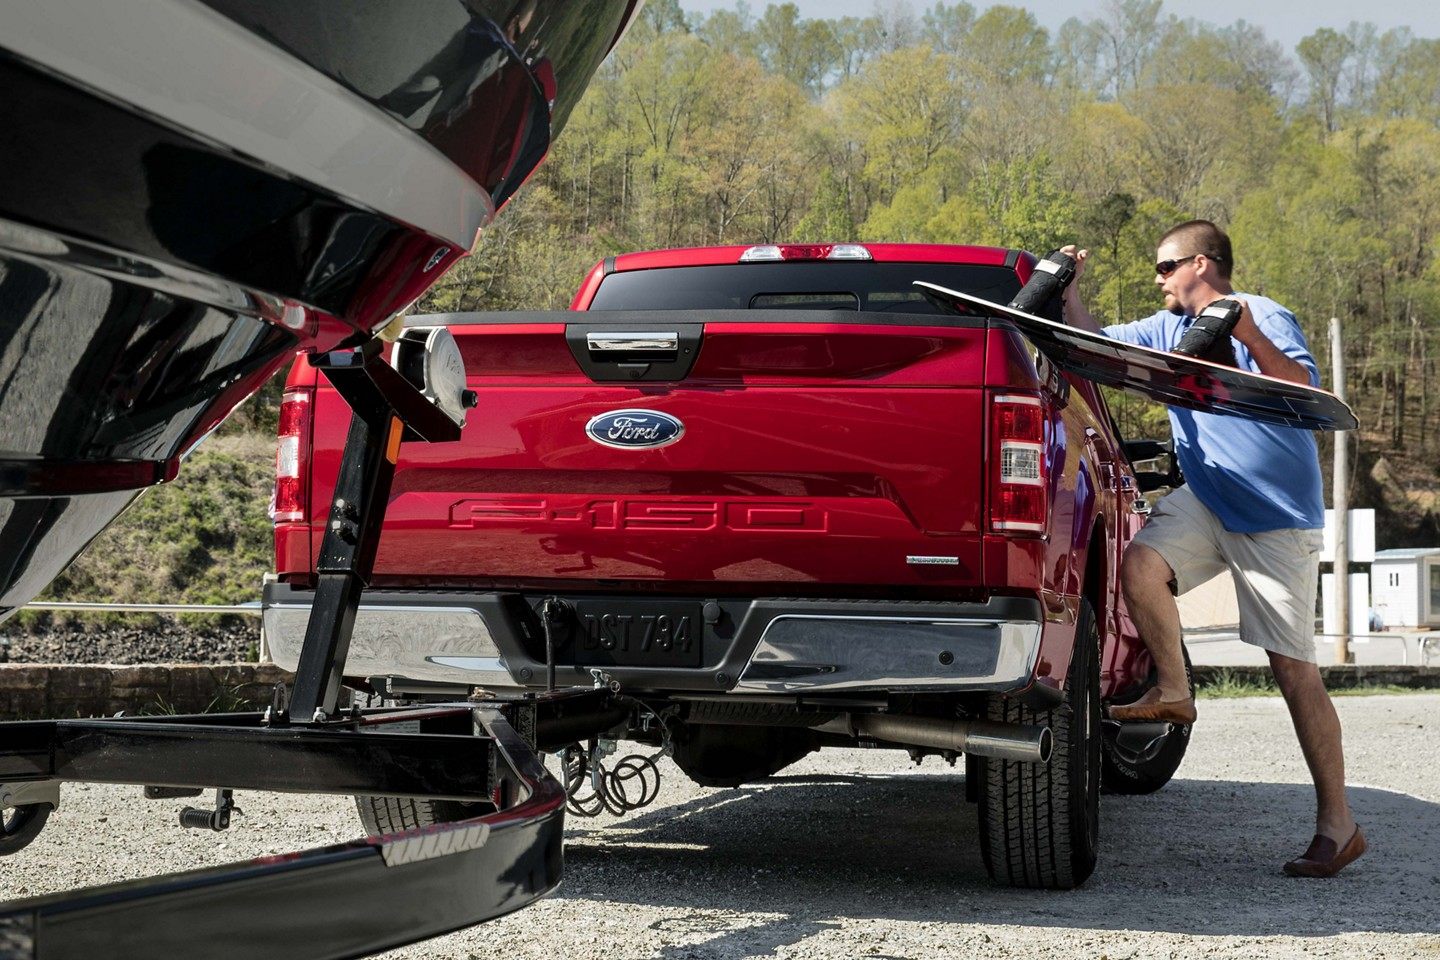 2019 Ford F-150 Red Exterior Rear View Picture.jpeg